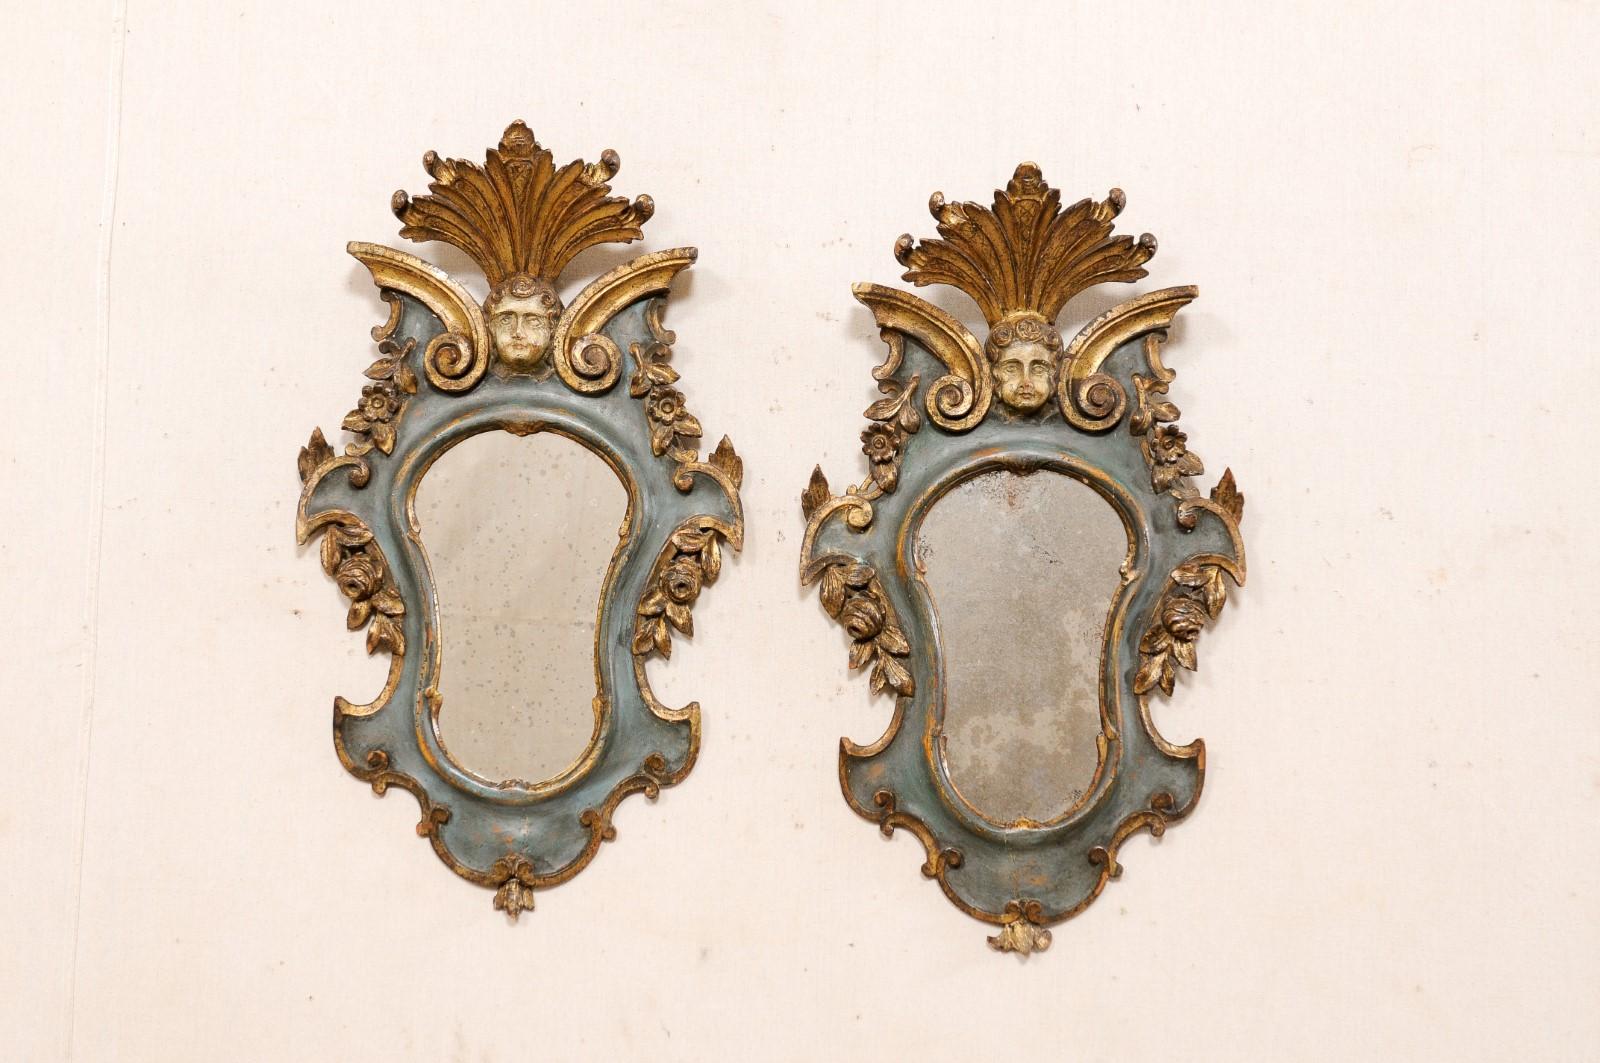 An Italian pair of small decorative Rococo style wall mirrors from the late 19th century. This pair of wall decorations from Italy have been created in Rococo style and carved with a leaf pediment top over a putto head at center, flanked within